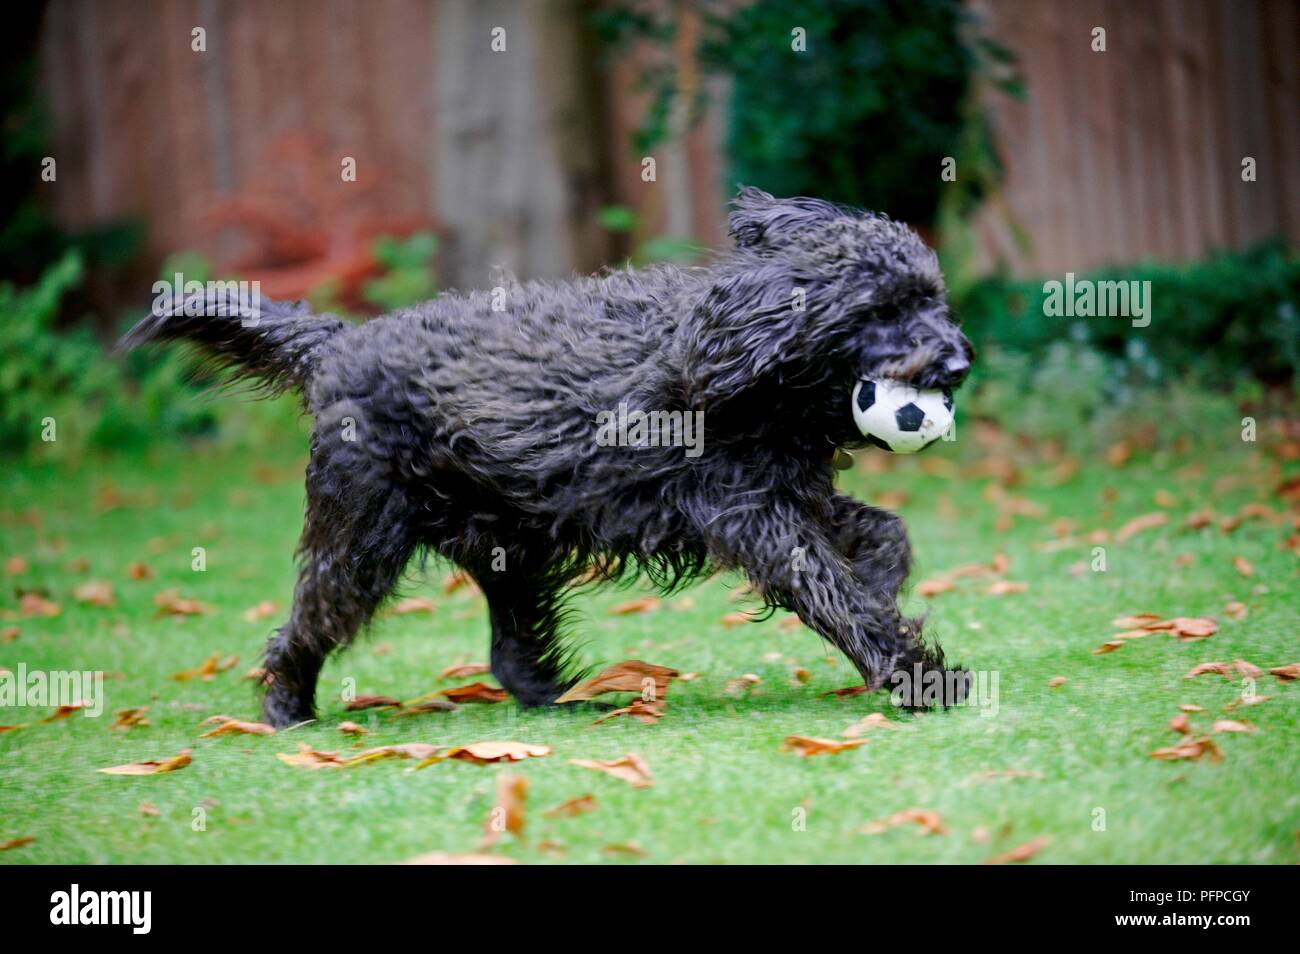 Small black dog carrying a ball, side view Stock Photo